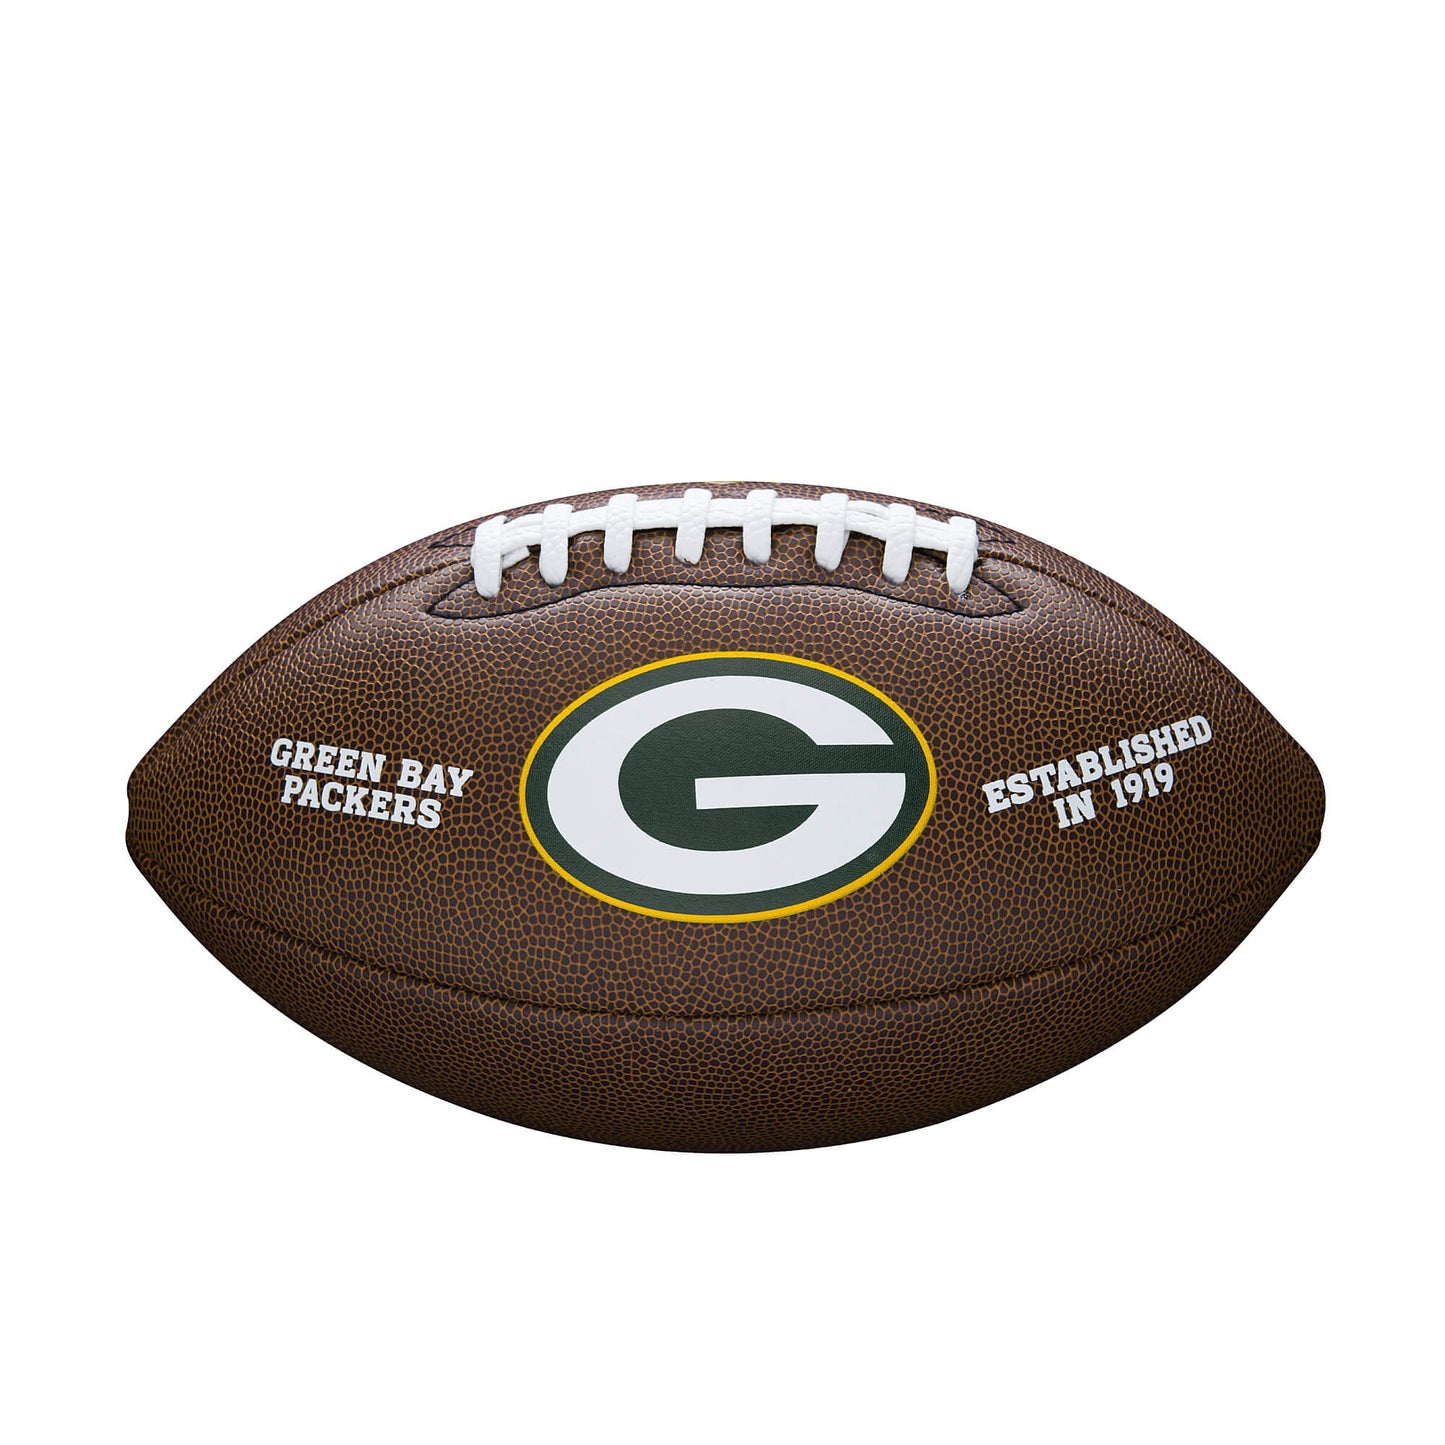 Wilson NFL Licensed Ball Green Bay Packers